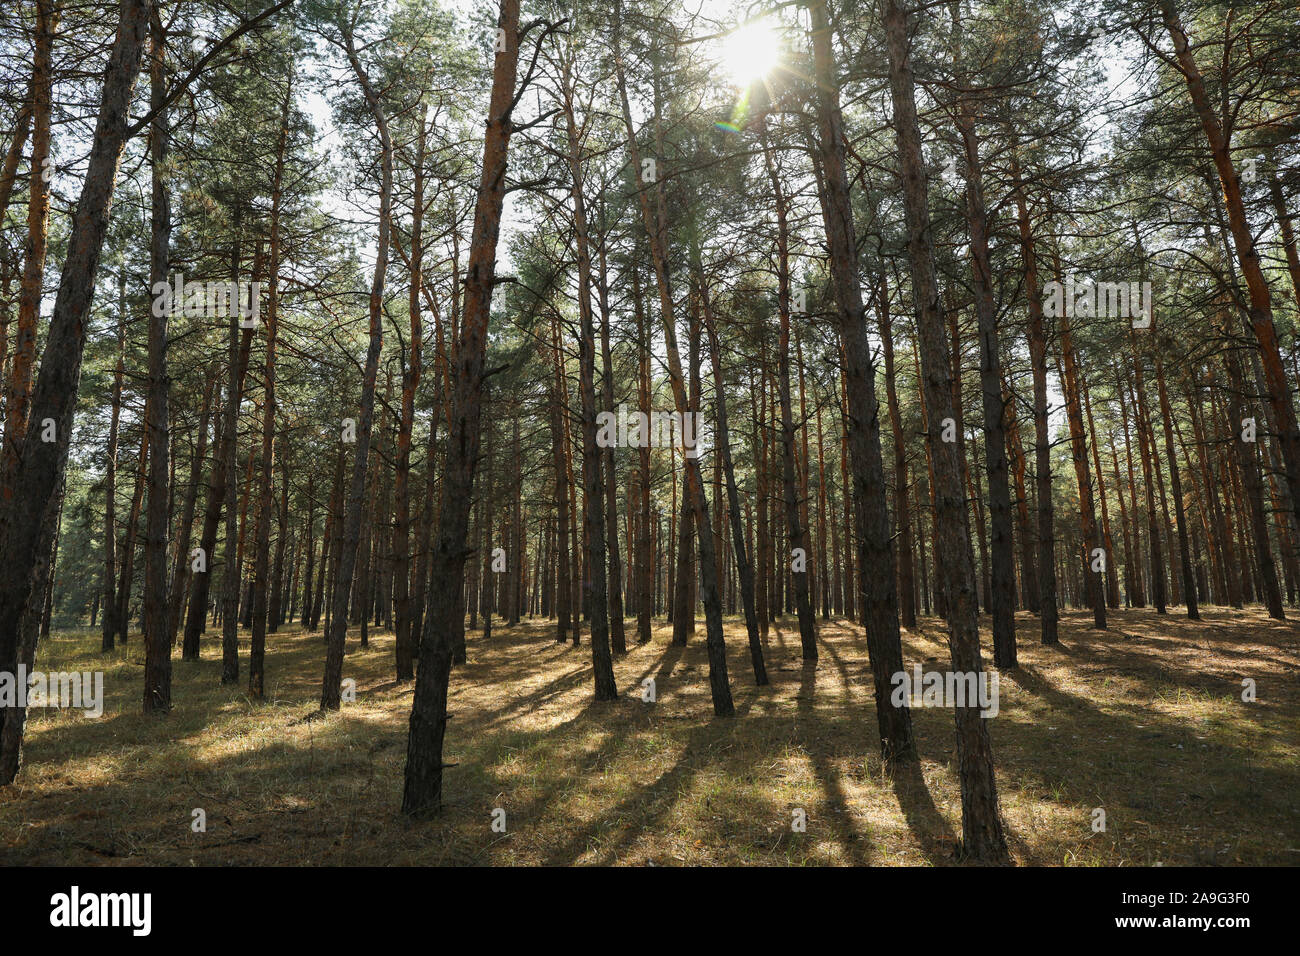 Tall pine trees in forest. Beautiful sunny day Stock Photo